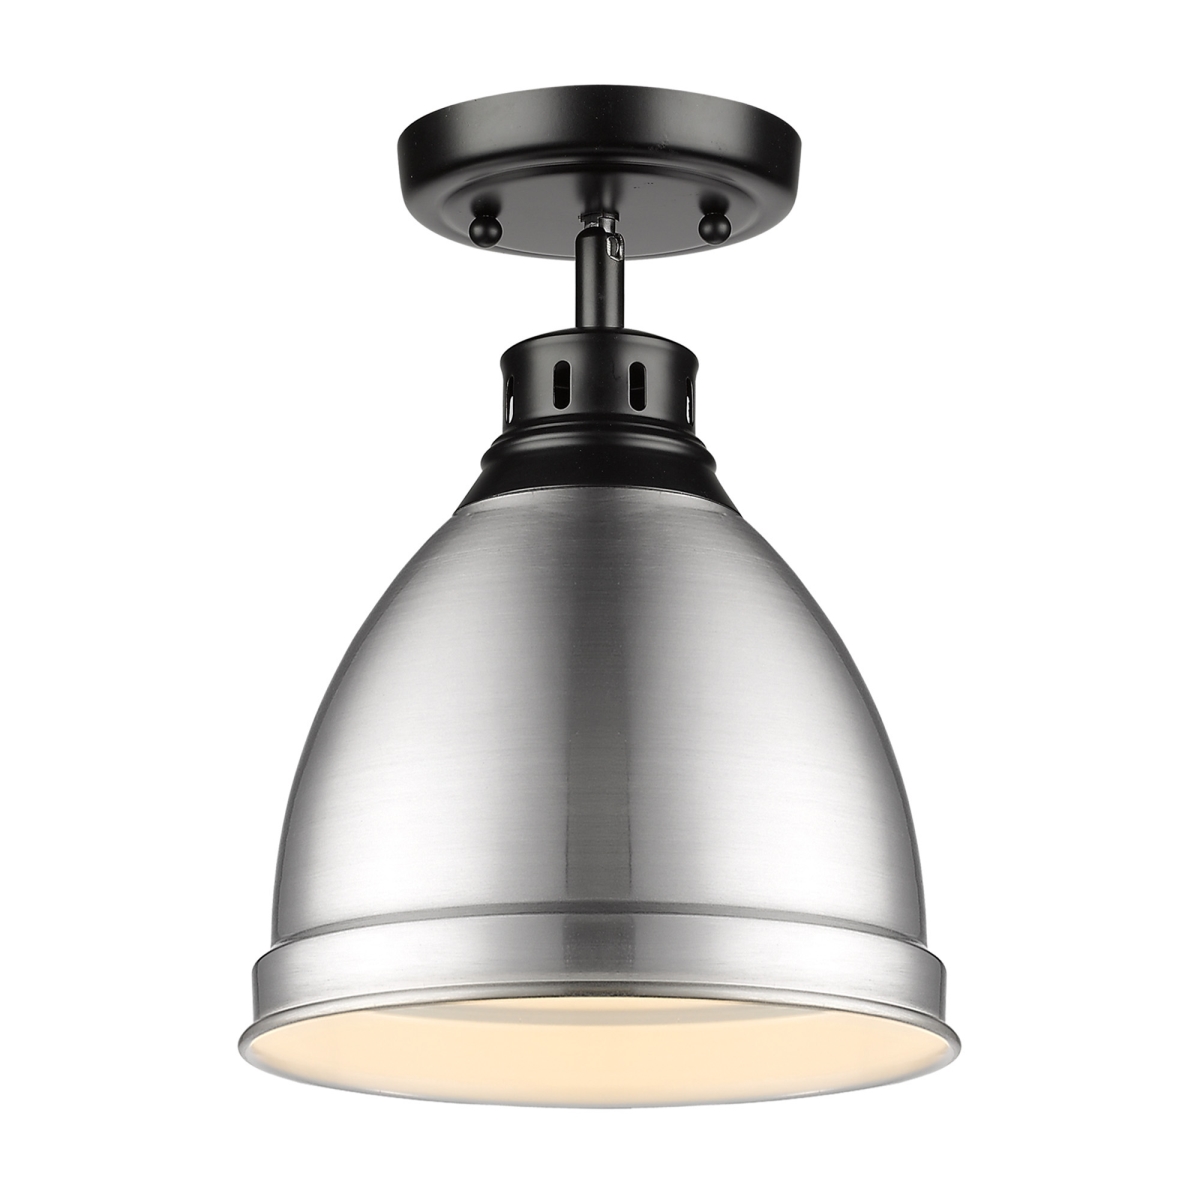 3602-fm Blk-pw Duncan Flush Mount In Black With A Pewter Shade